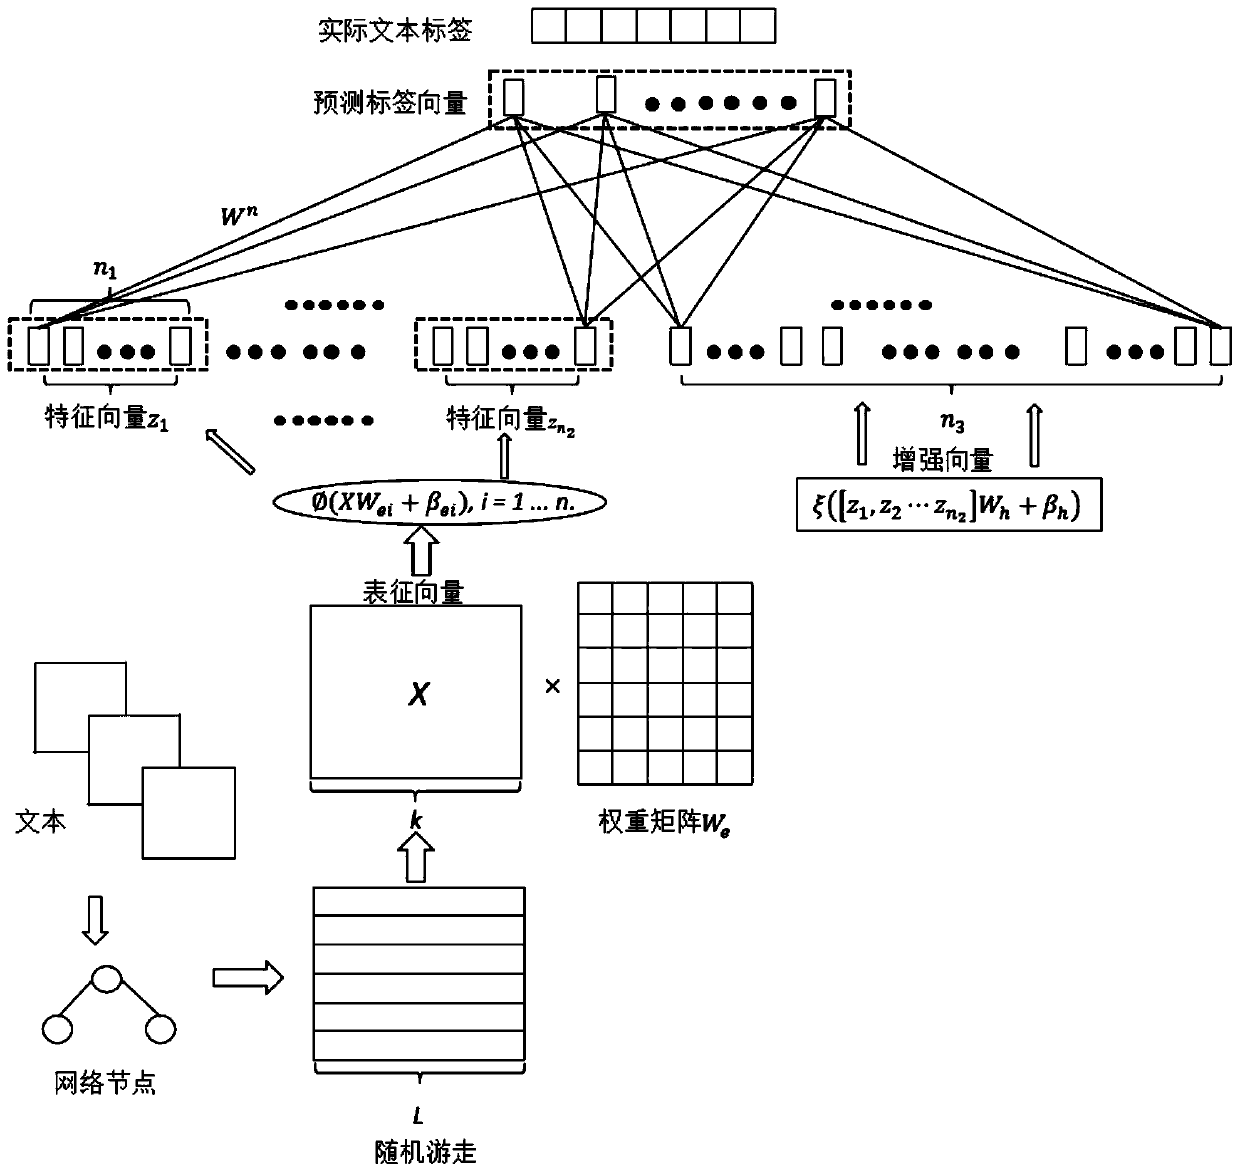 Rapid network characterization learning algorithm based on width learning system